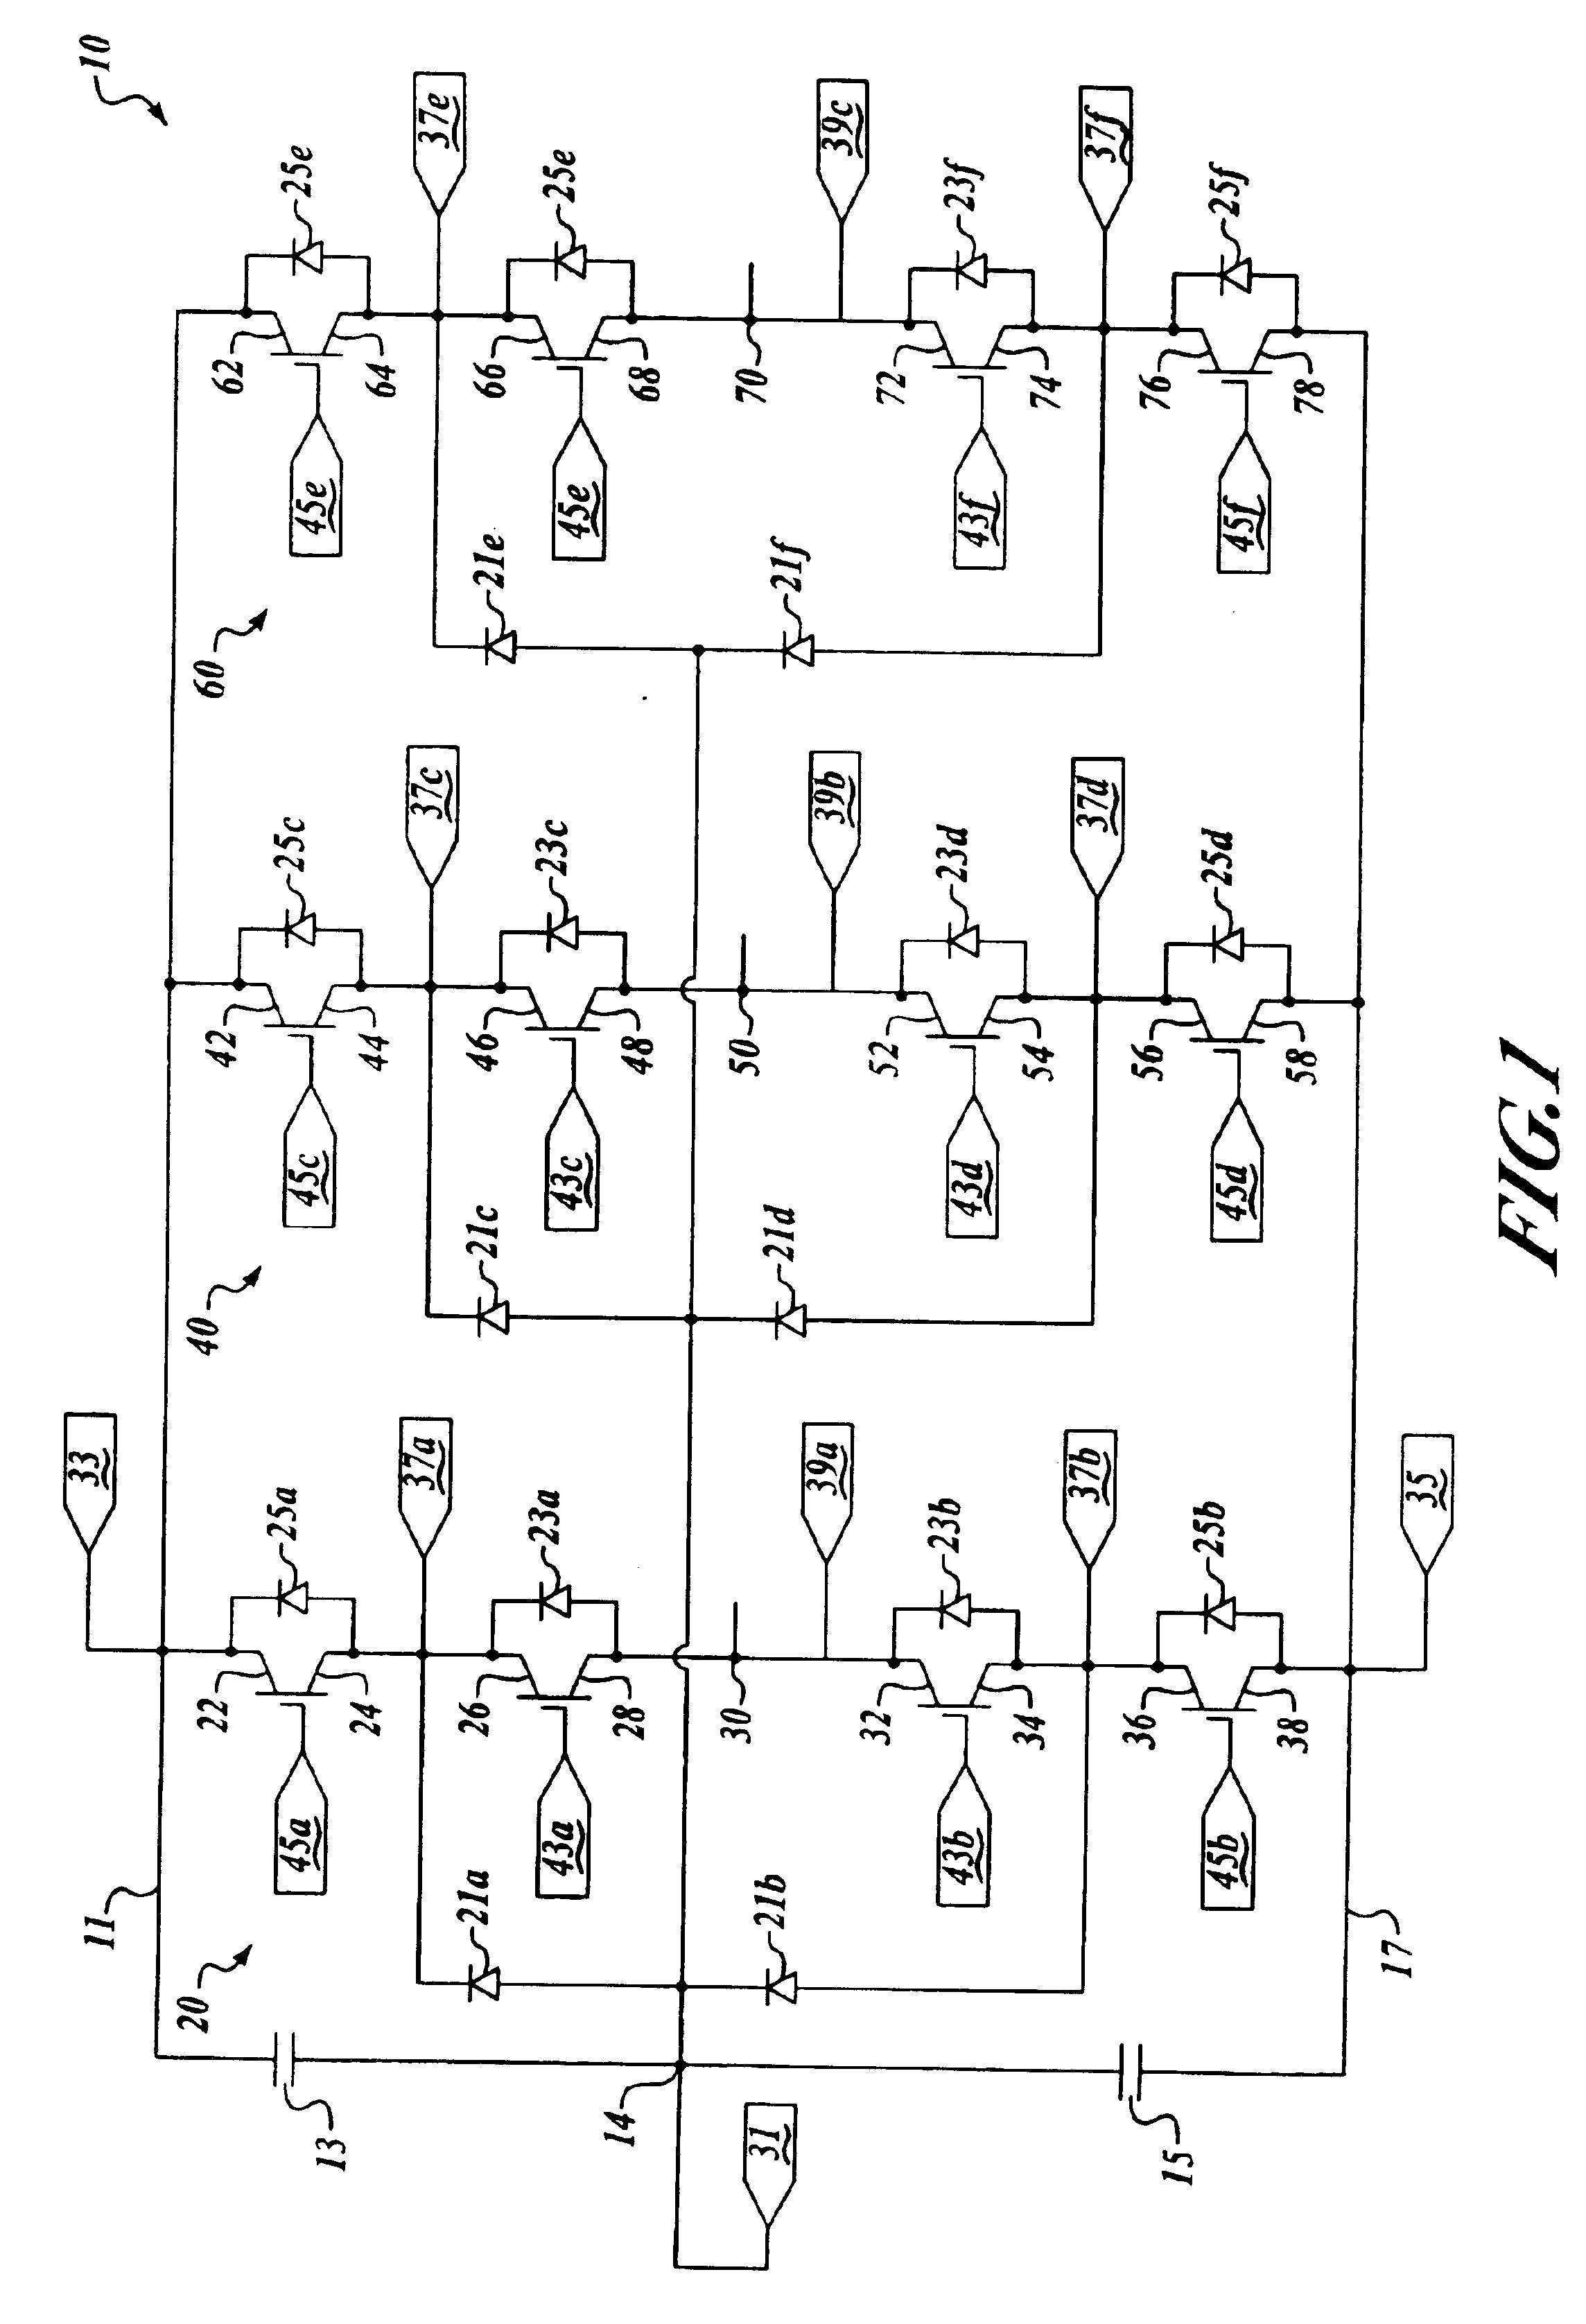 Control method for peak power delivery with limited DC-bus voltage